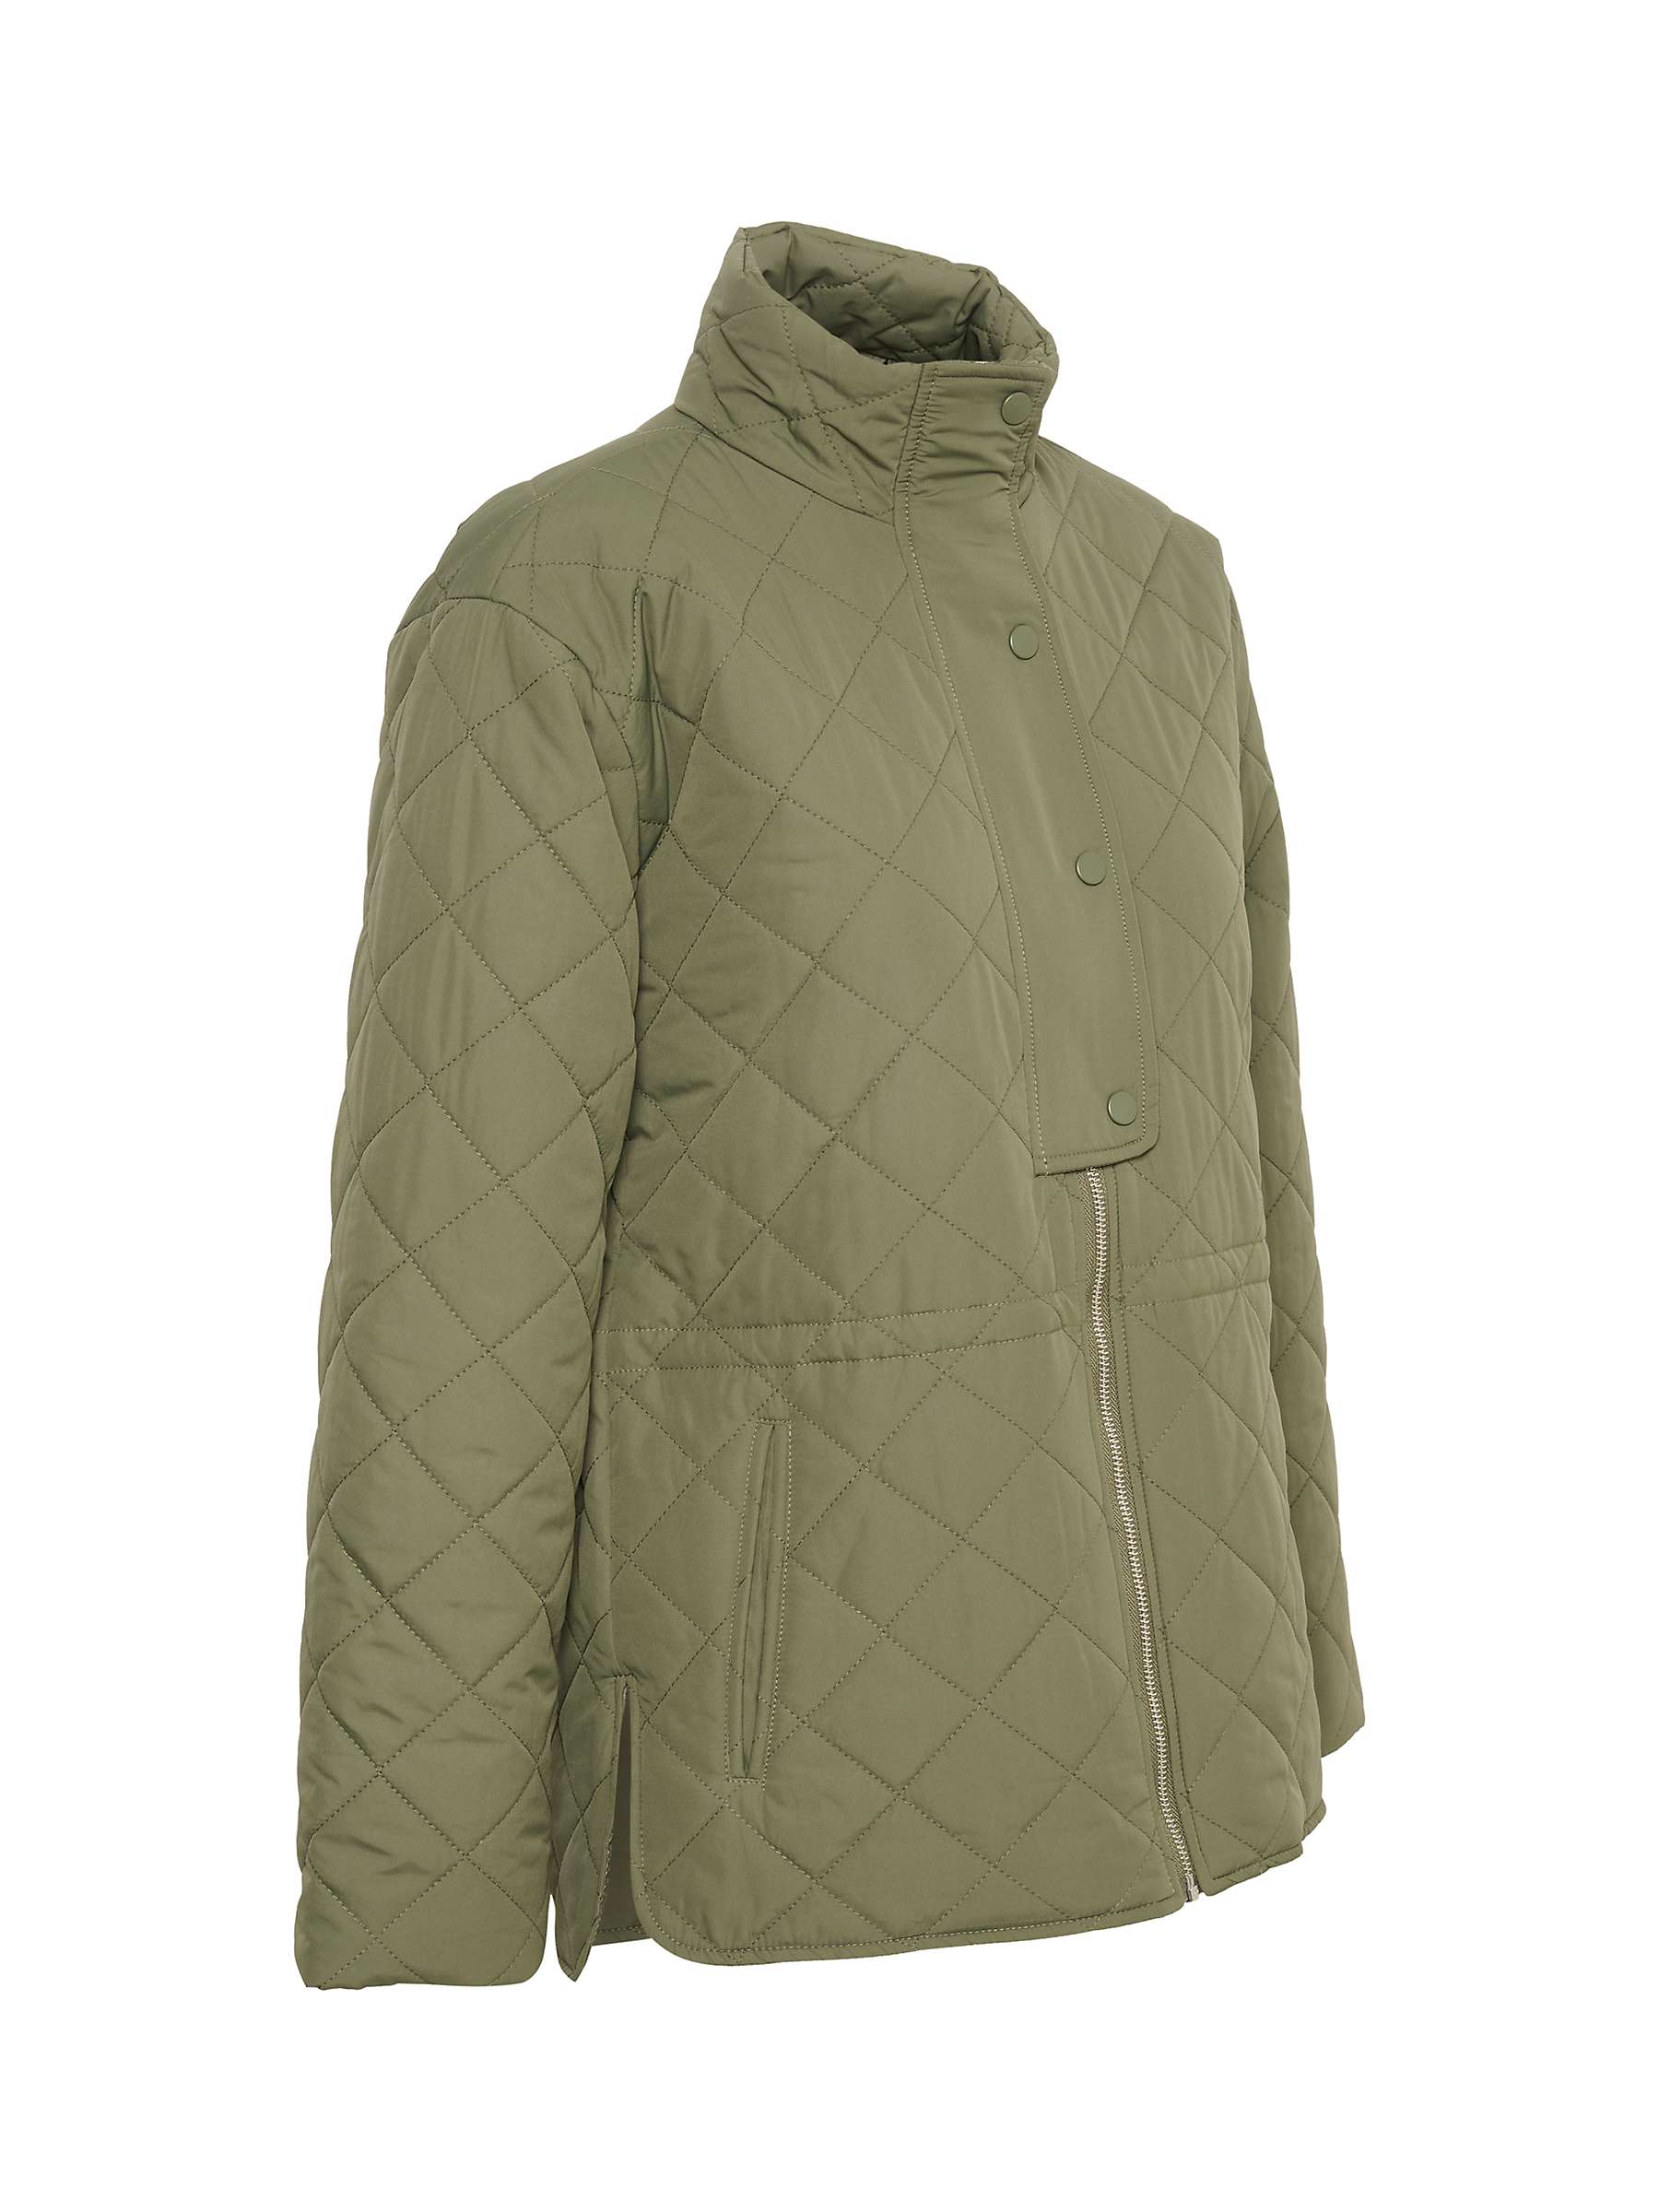 Buy InWear Mopa Long Sleeve Quilted Jacket Online at johnlewis.com